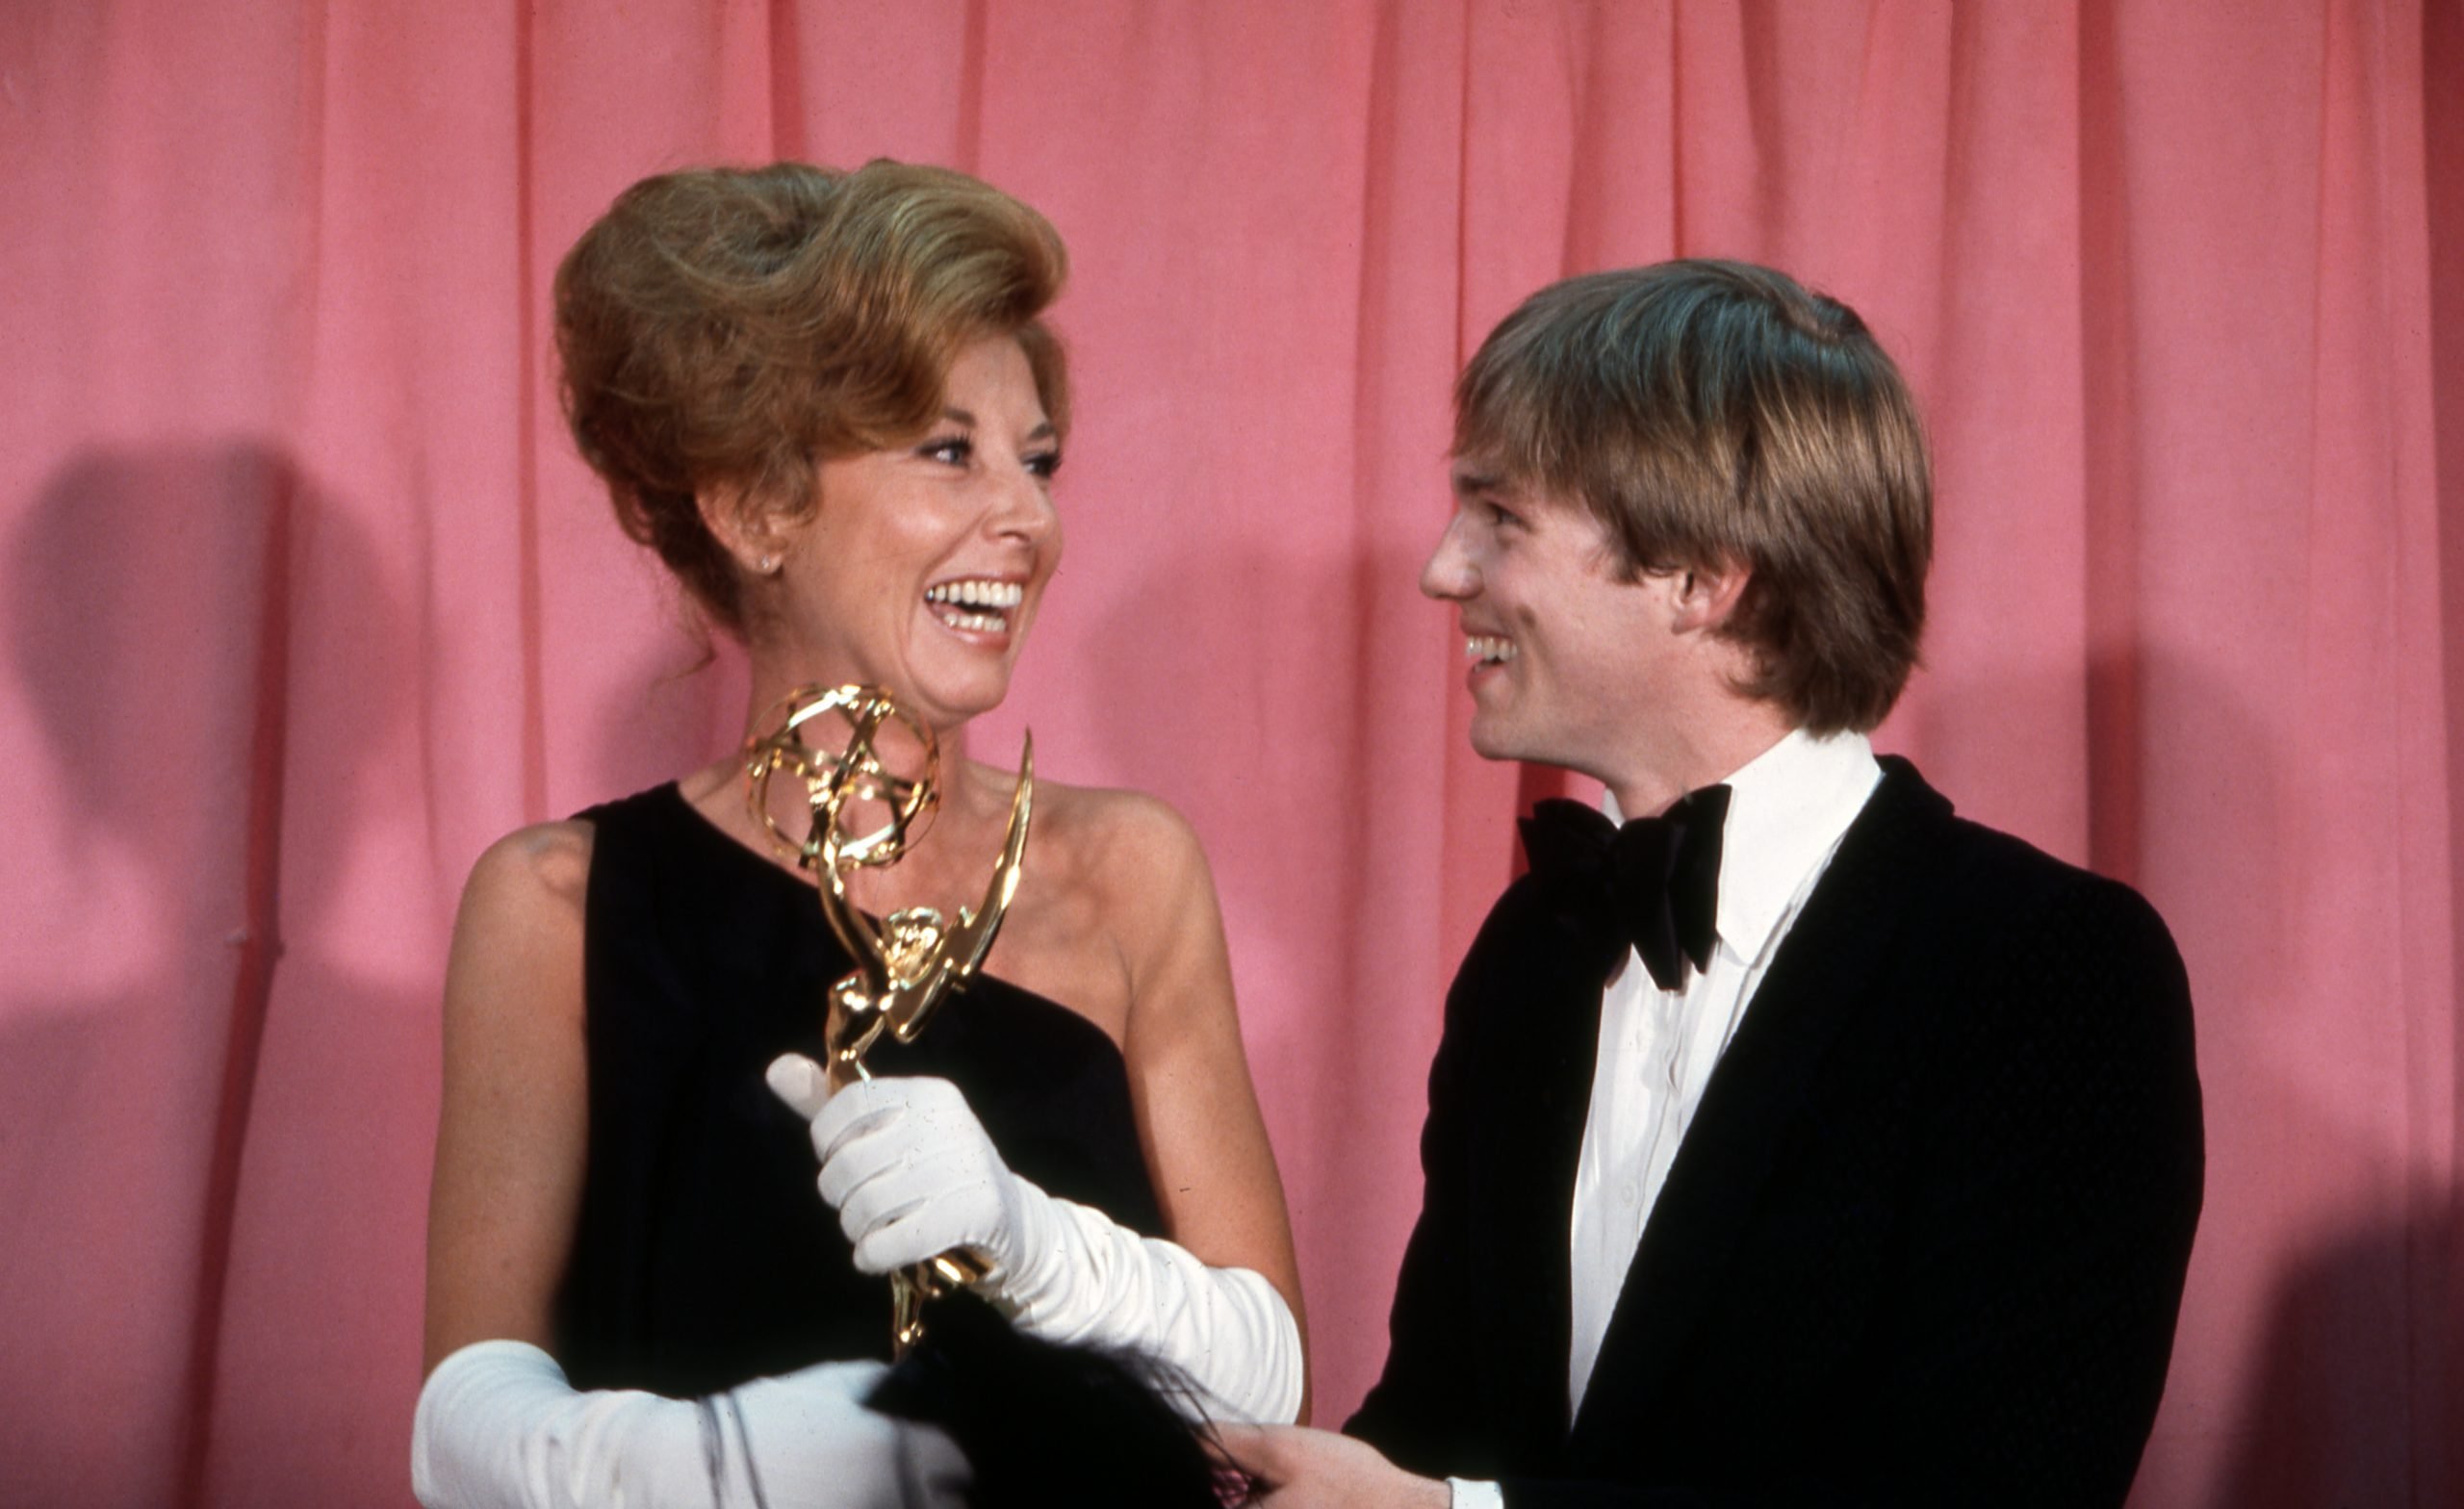 Michael Learned and Richard Thomas at the Emmys 